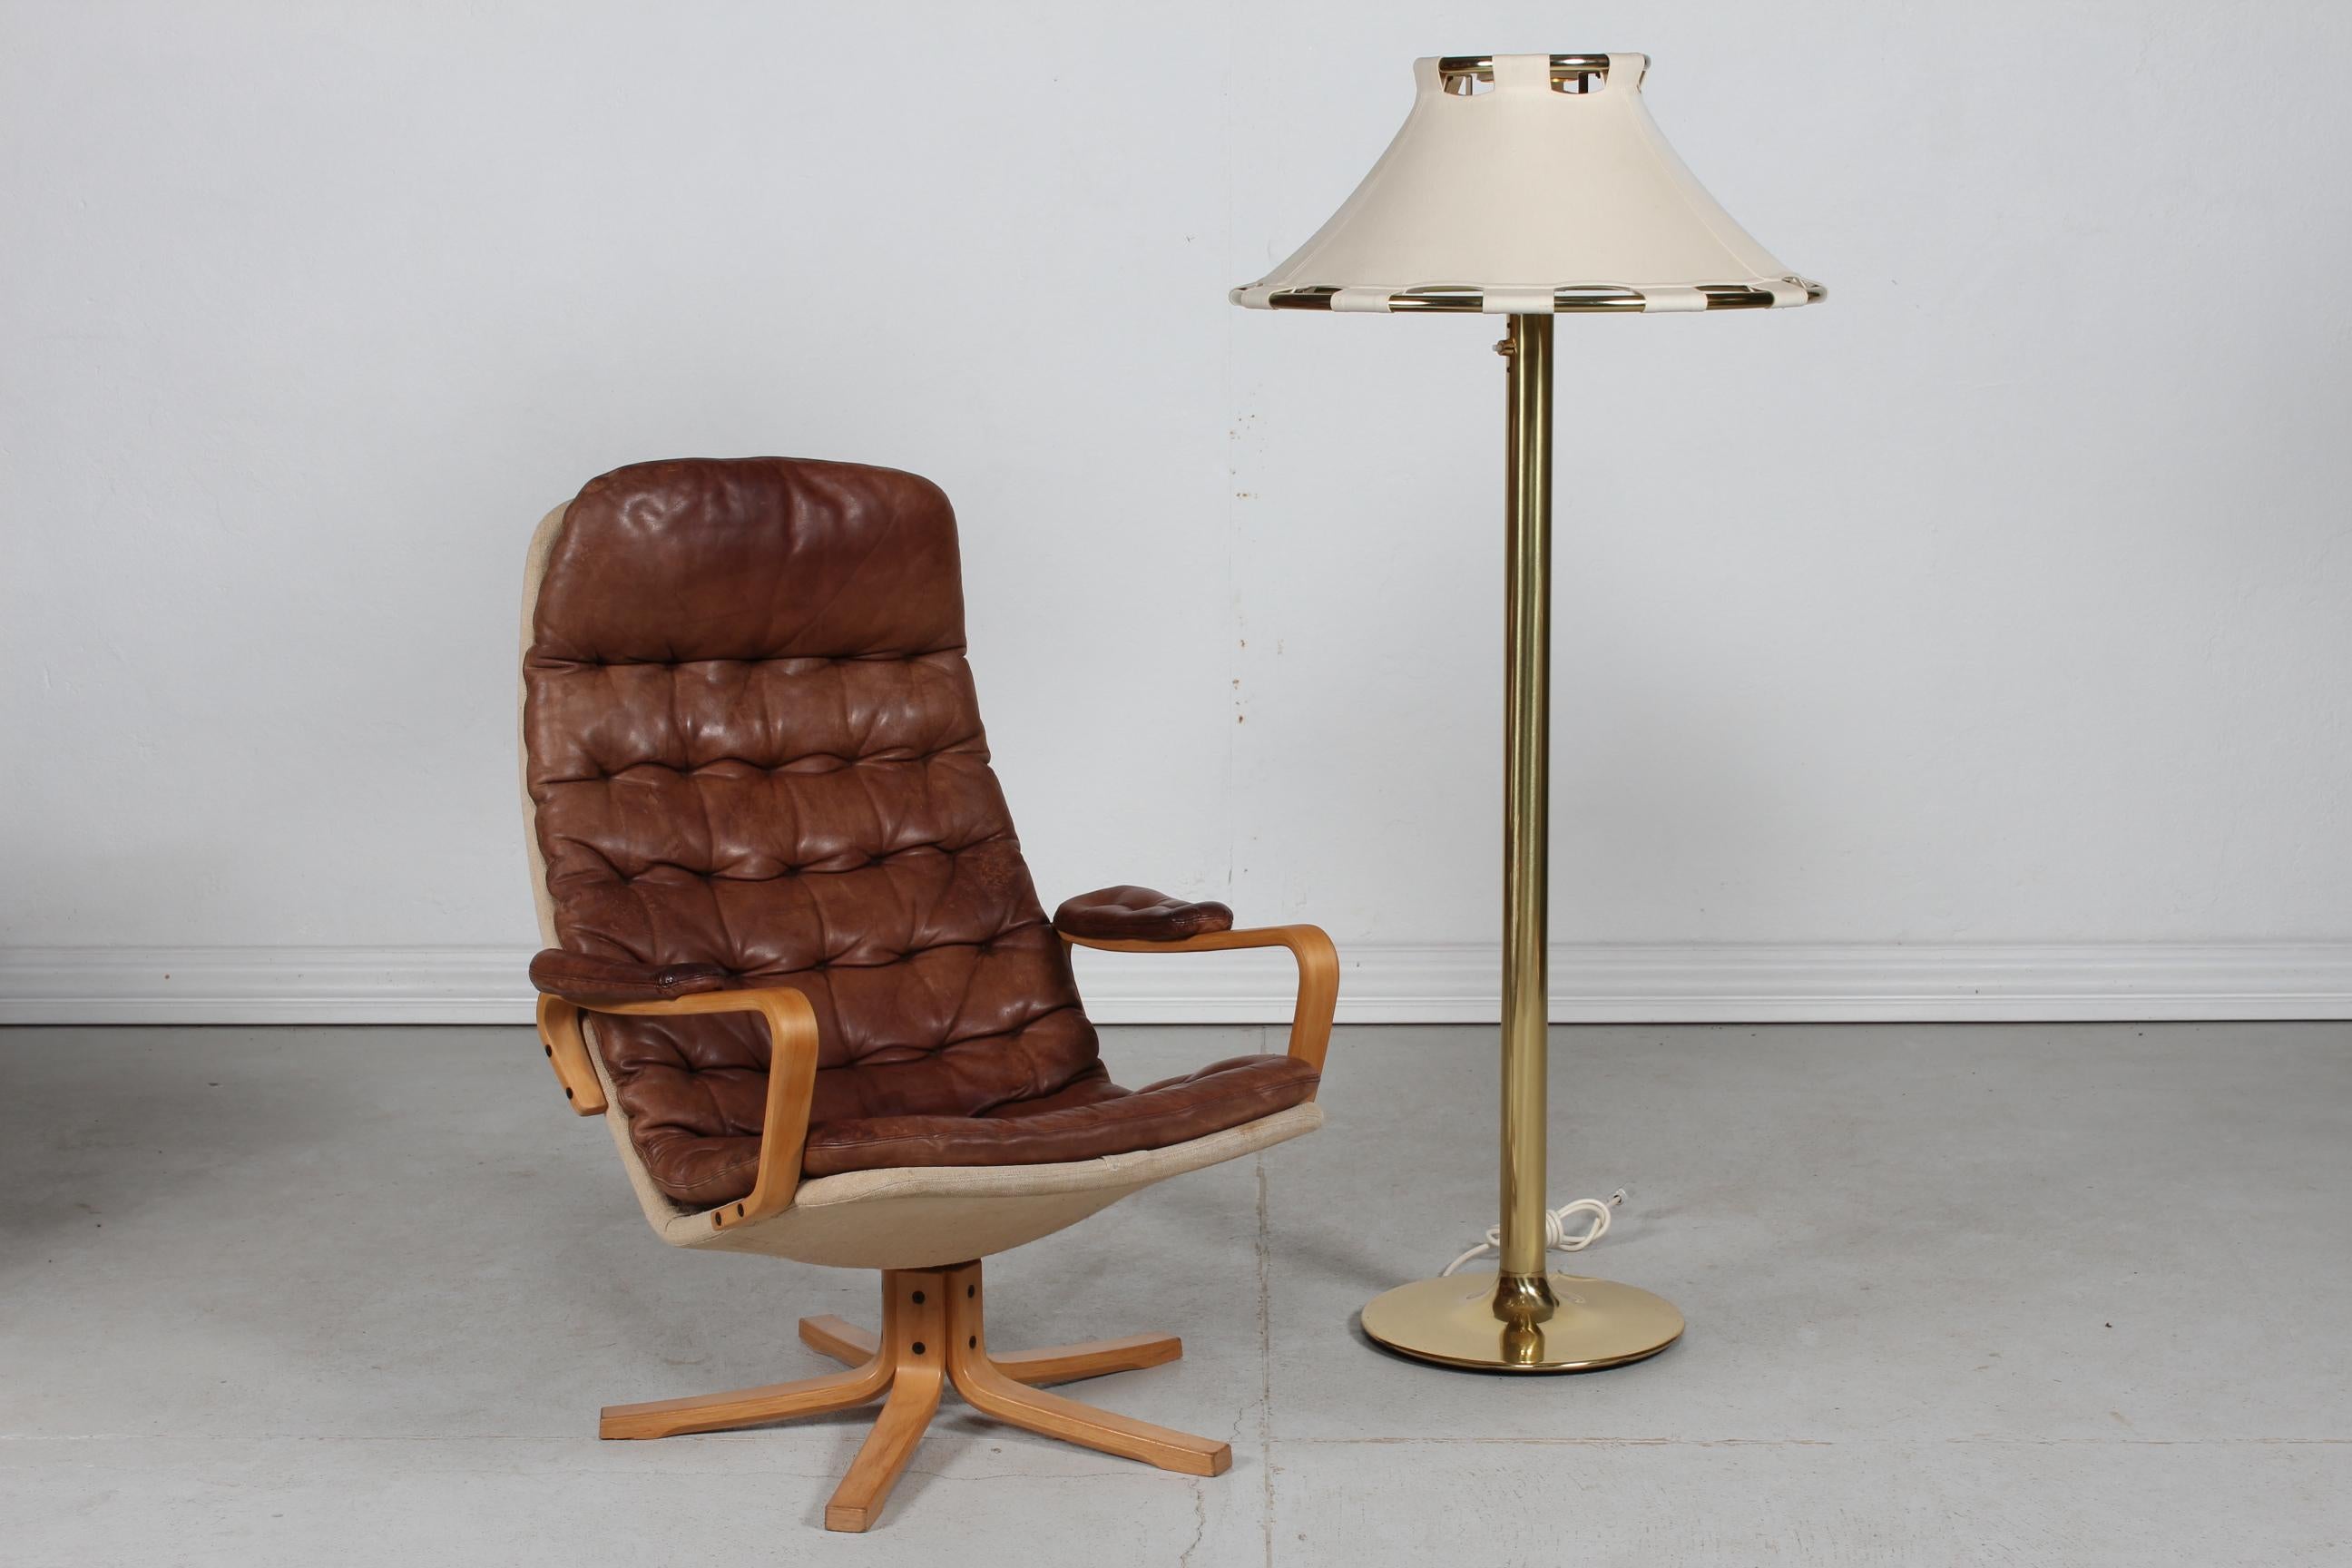 Swedish Sam Larsson Mona Roto Swivel Chair Beech and Cognac Colored Leather 1970 For Sale 10